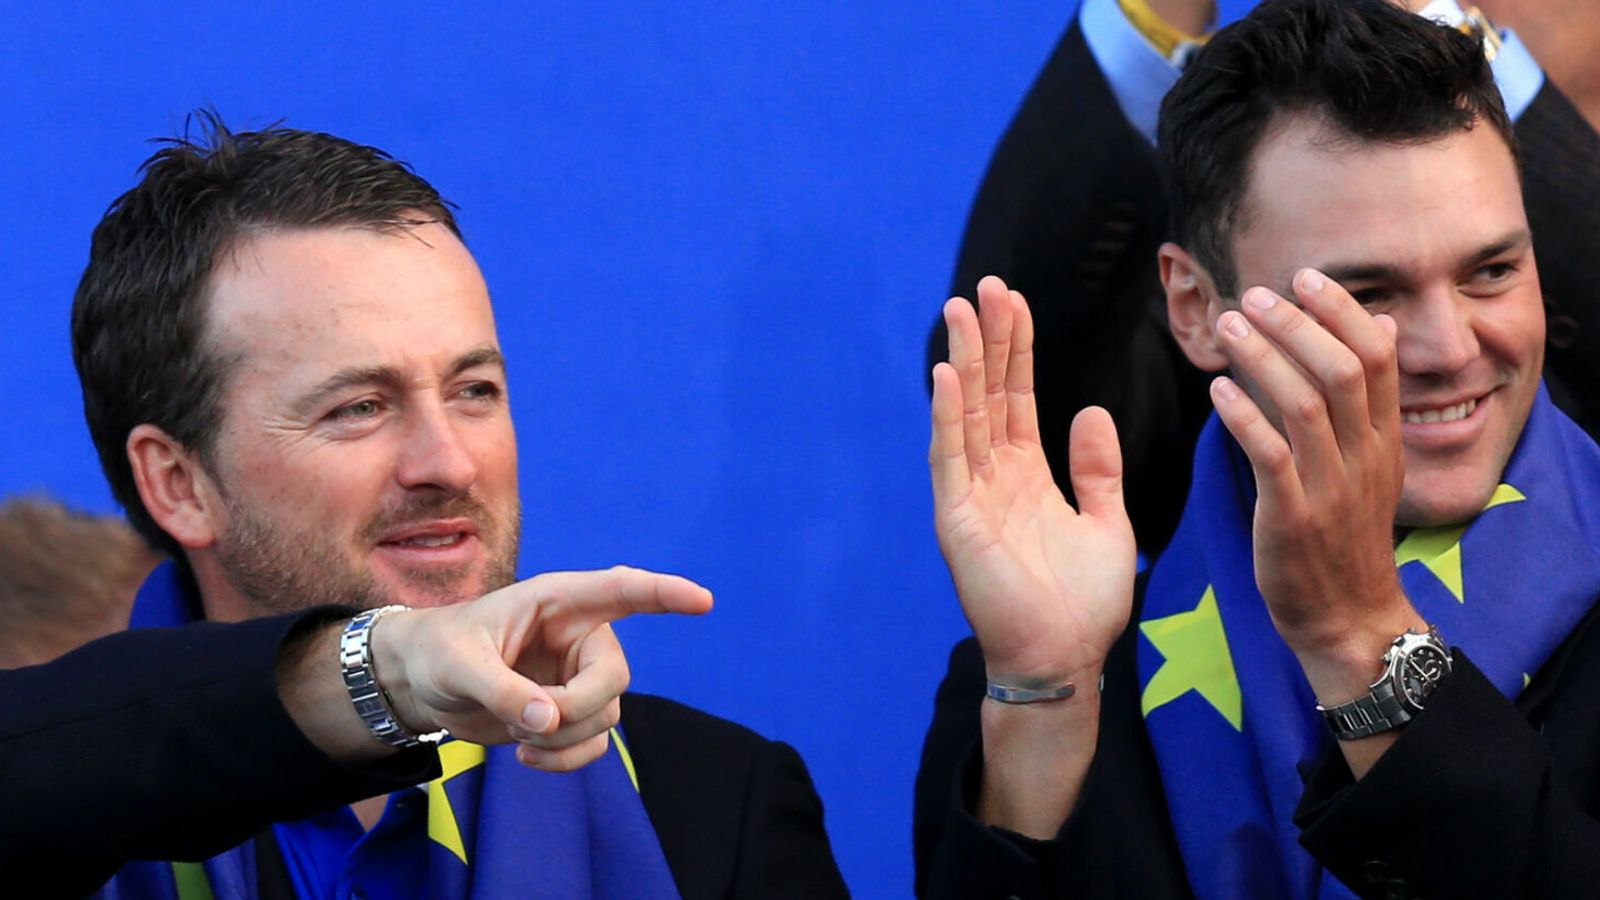 Ryder Cup 2020 Martin Kaymer and Graeme McDowell named vice captains